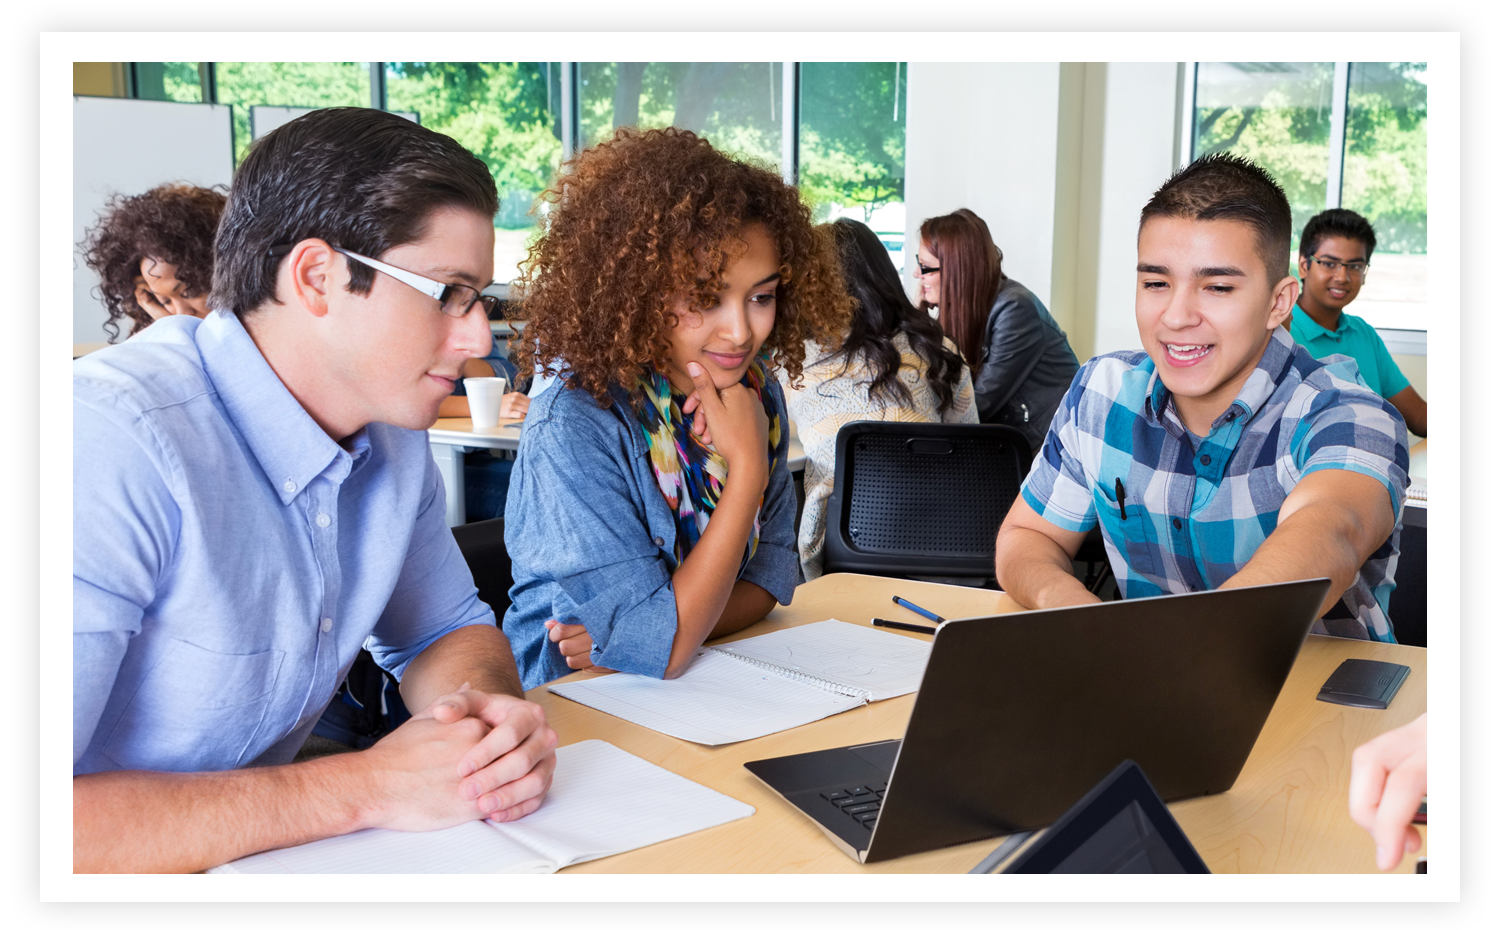 stock image of students studying together